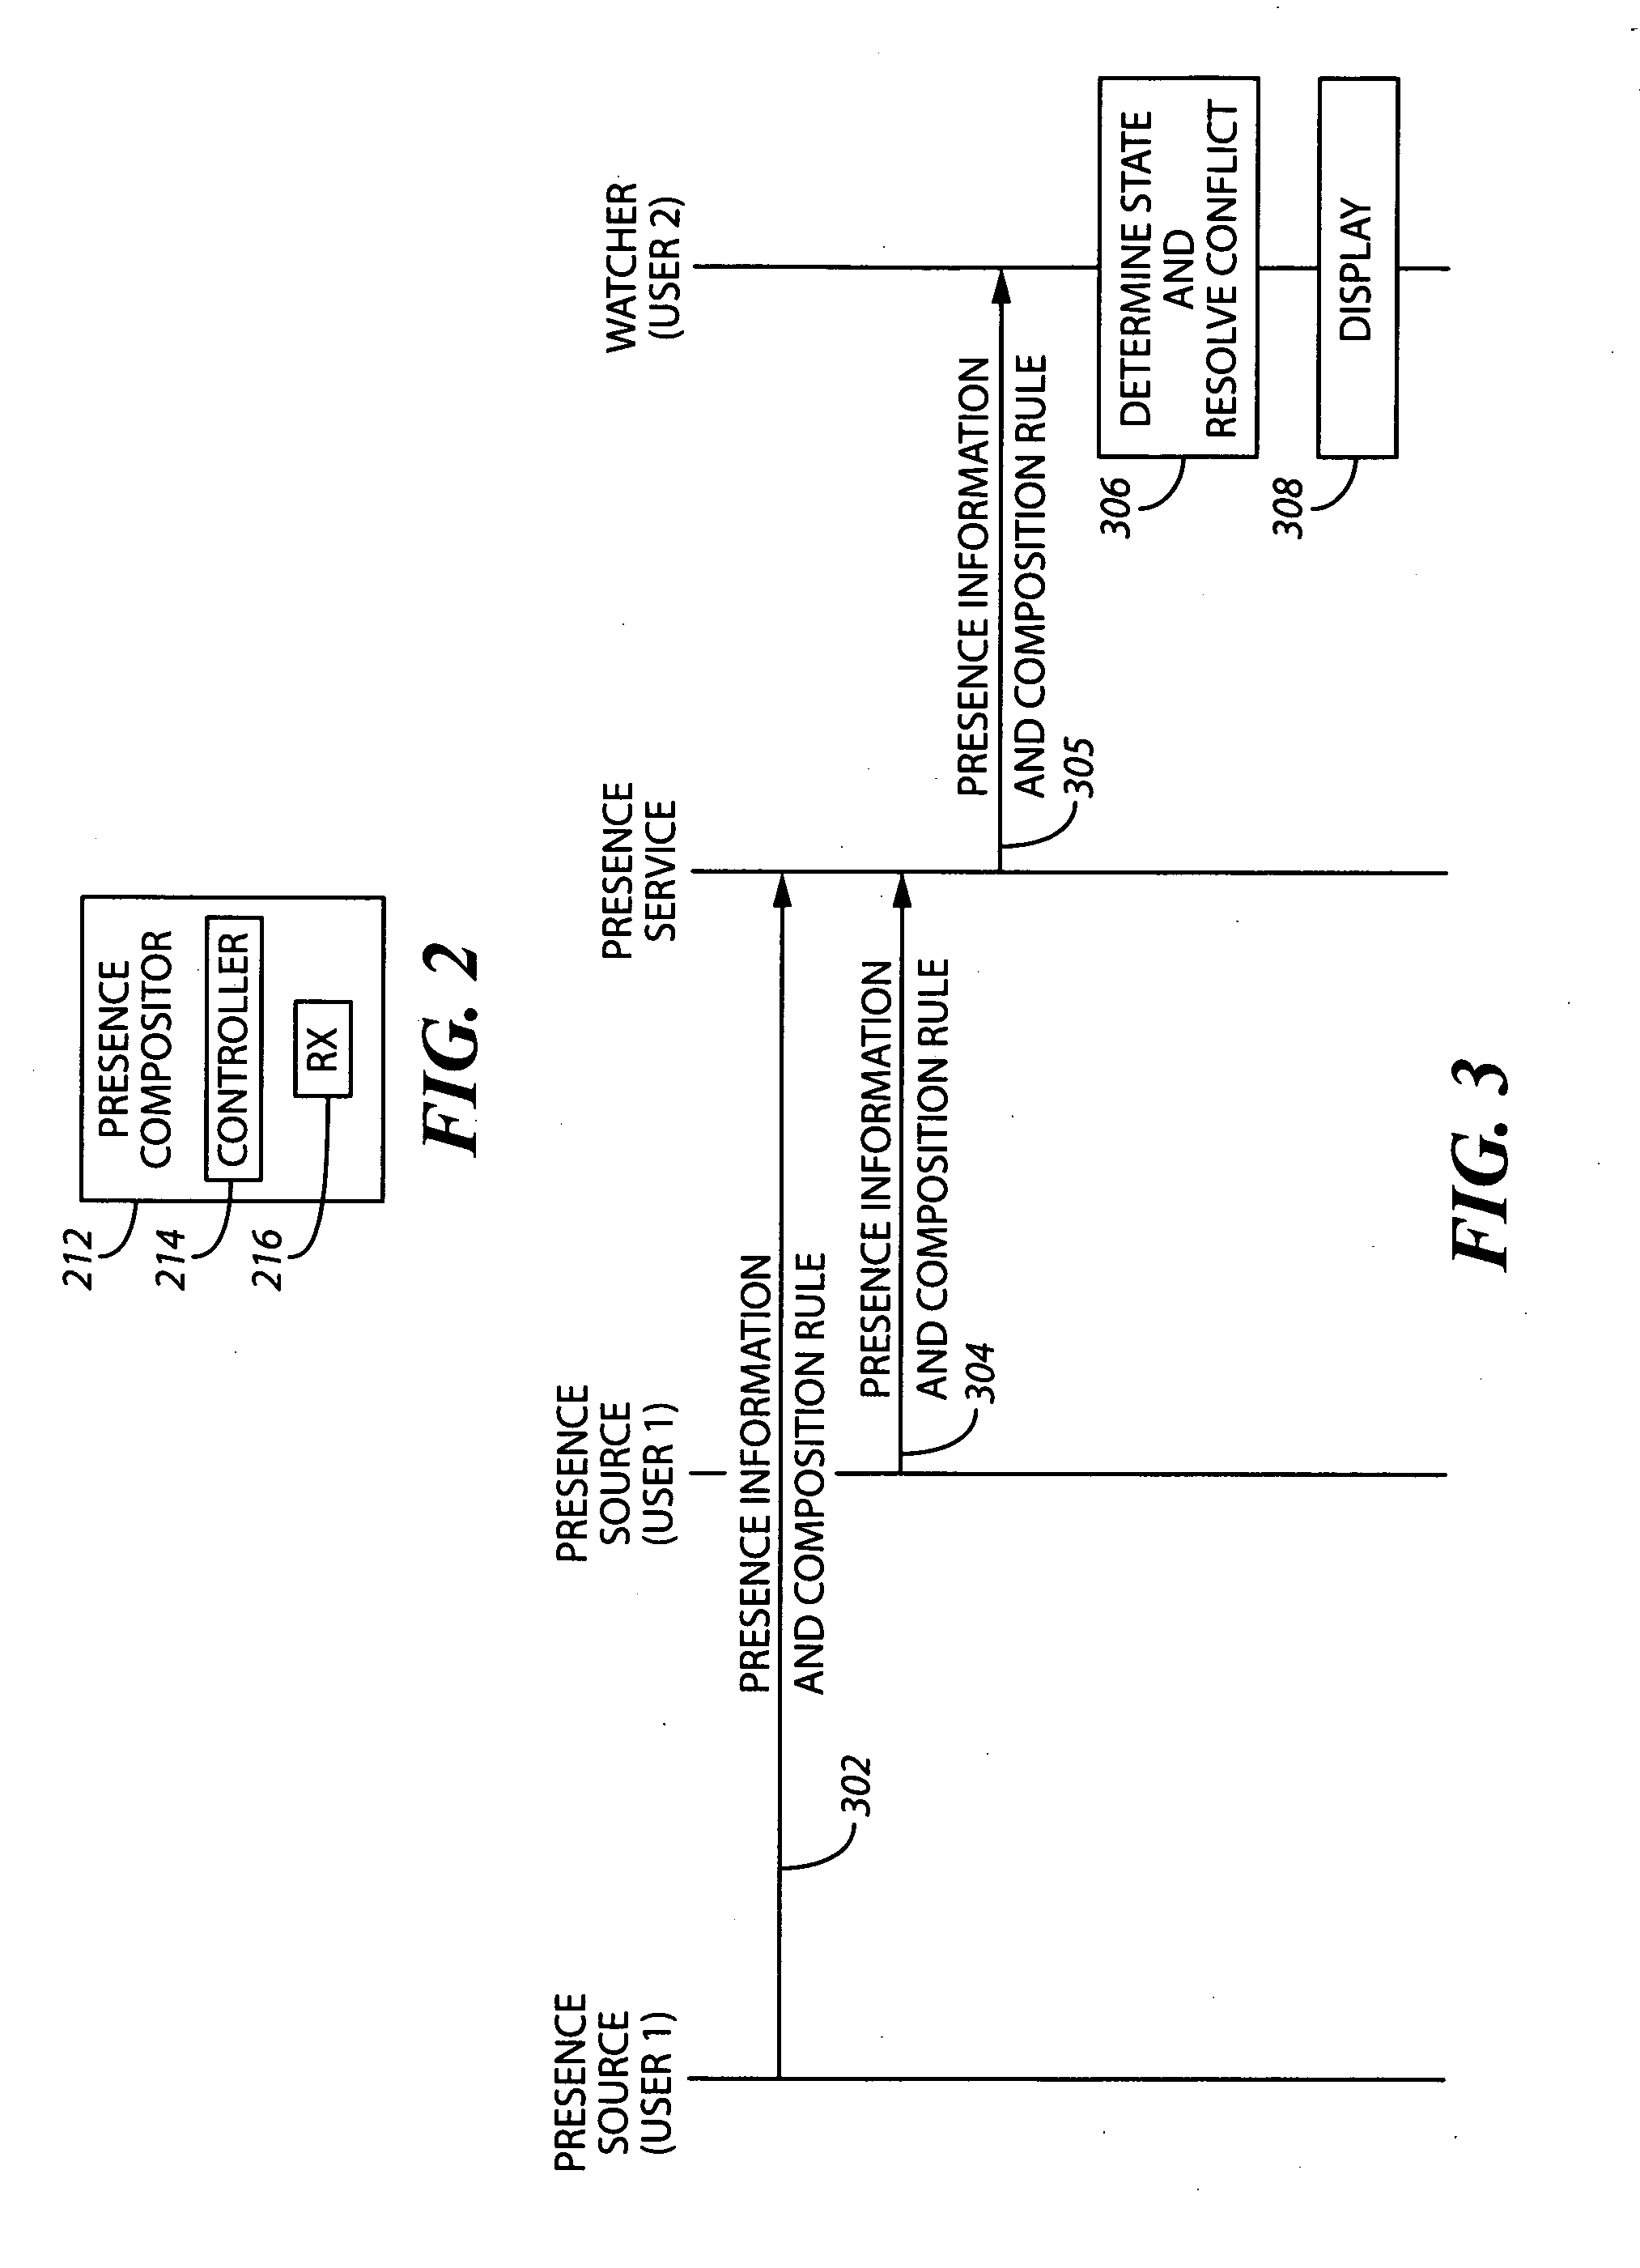 System and method for determining a presence state of a user